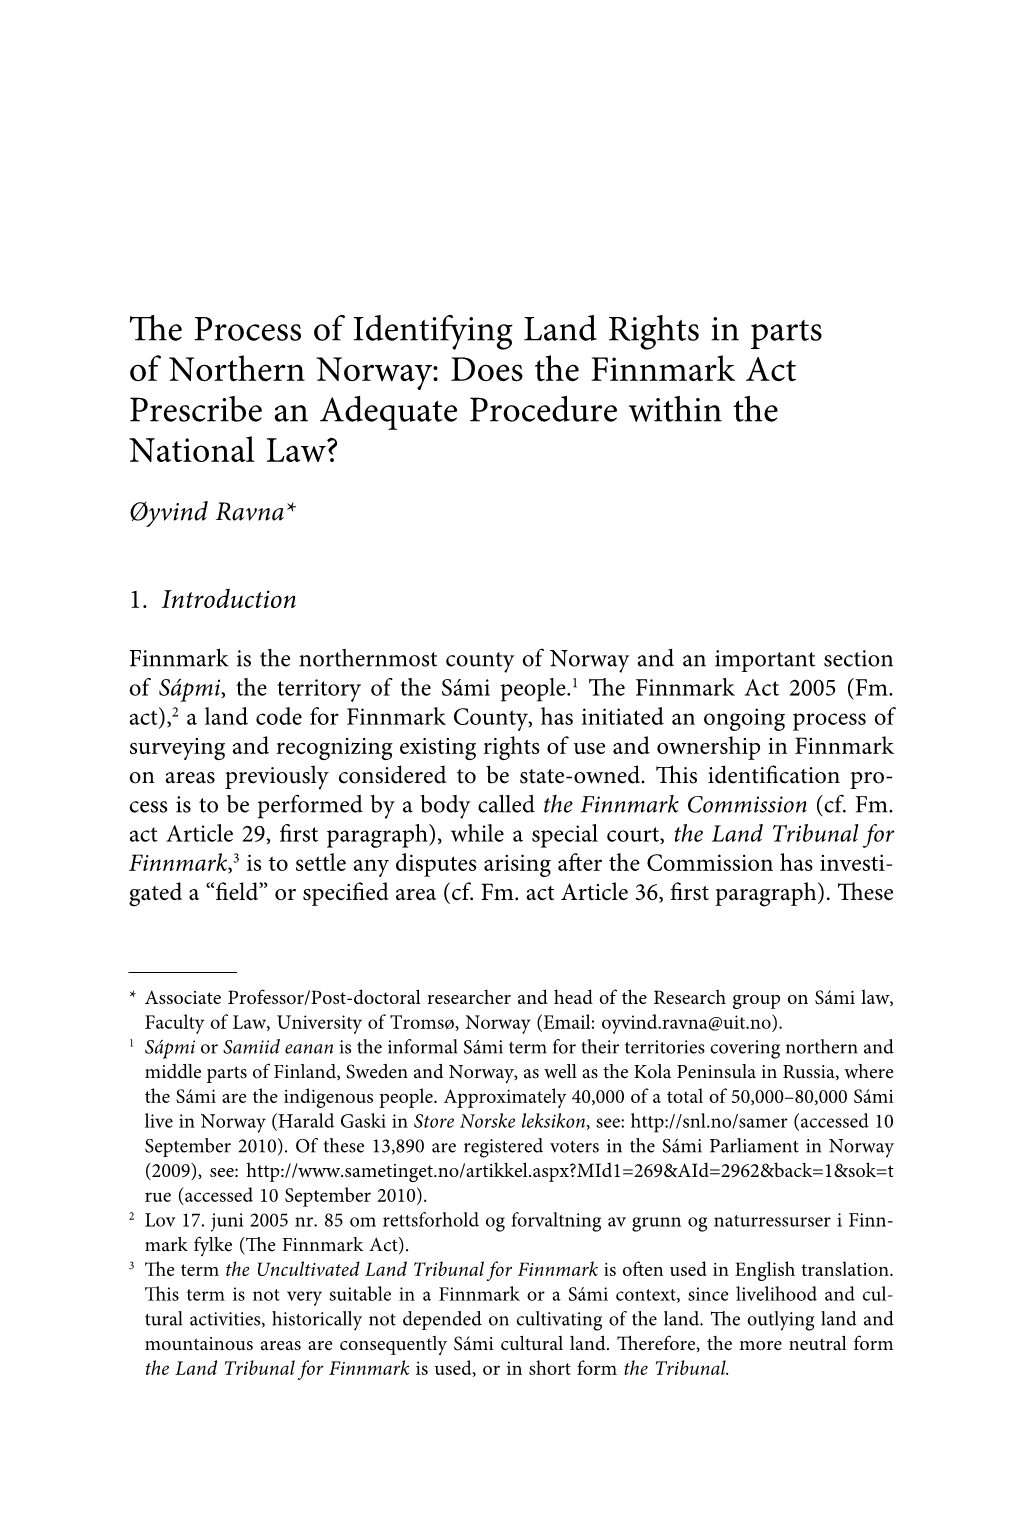 The Process of Identifying Land Rights in Parts of Northern Norway: Does the Finnmark Act Prescribe an Adequate Procedure Within the National Law?